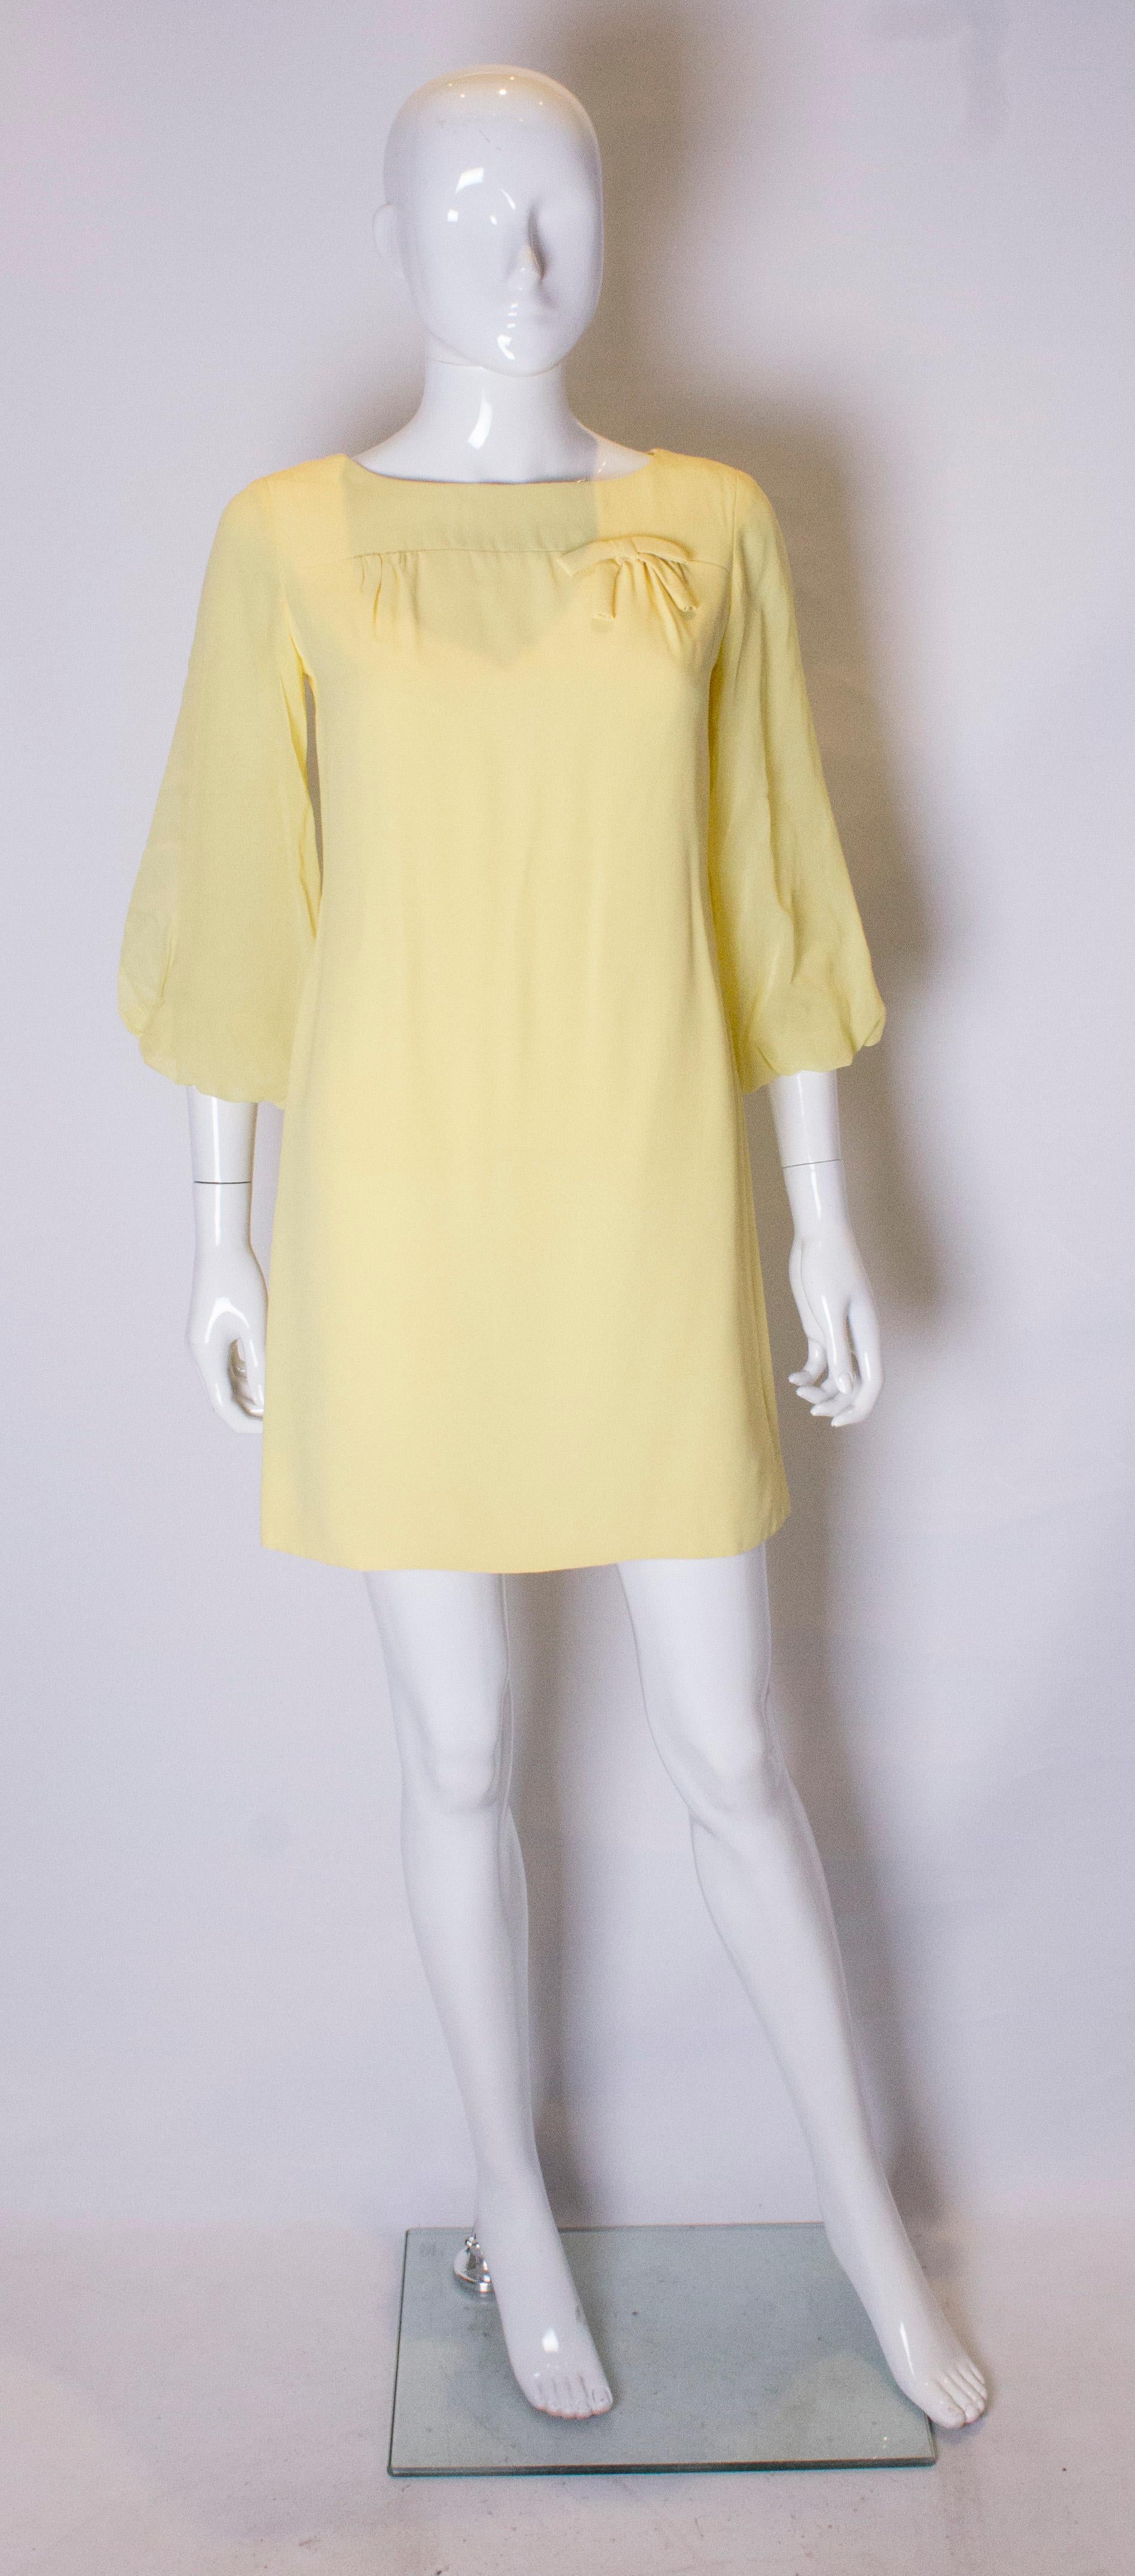  A pretty yellow mini dress with great sleaves. The dress is shift shape, and fully lined with a central back zip. It has a round neckline, and sheer bell sleaves which are elbow length.